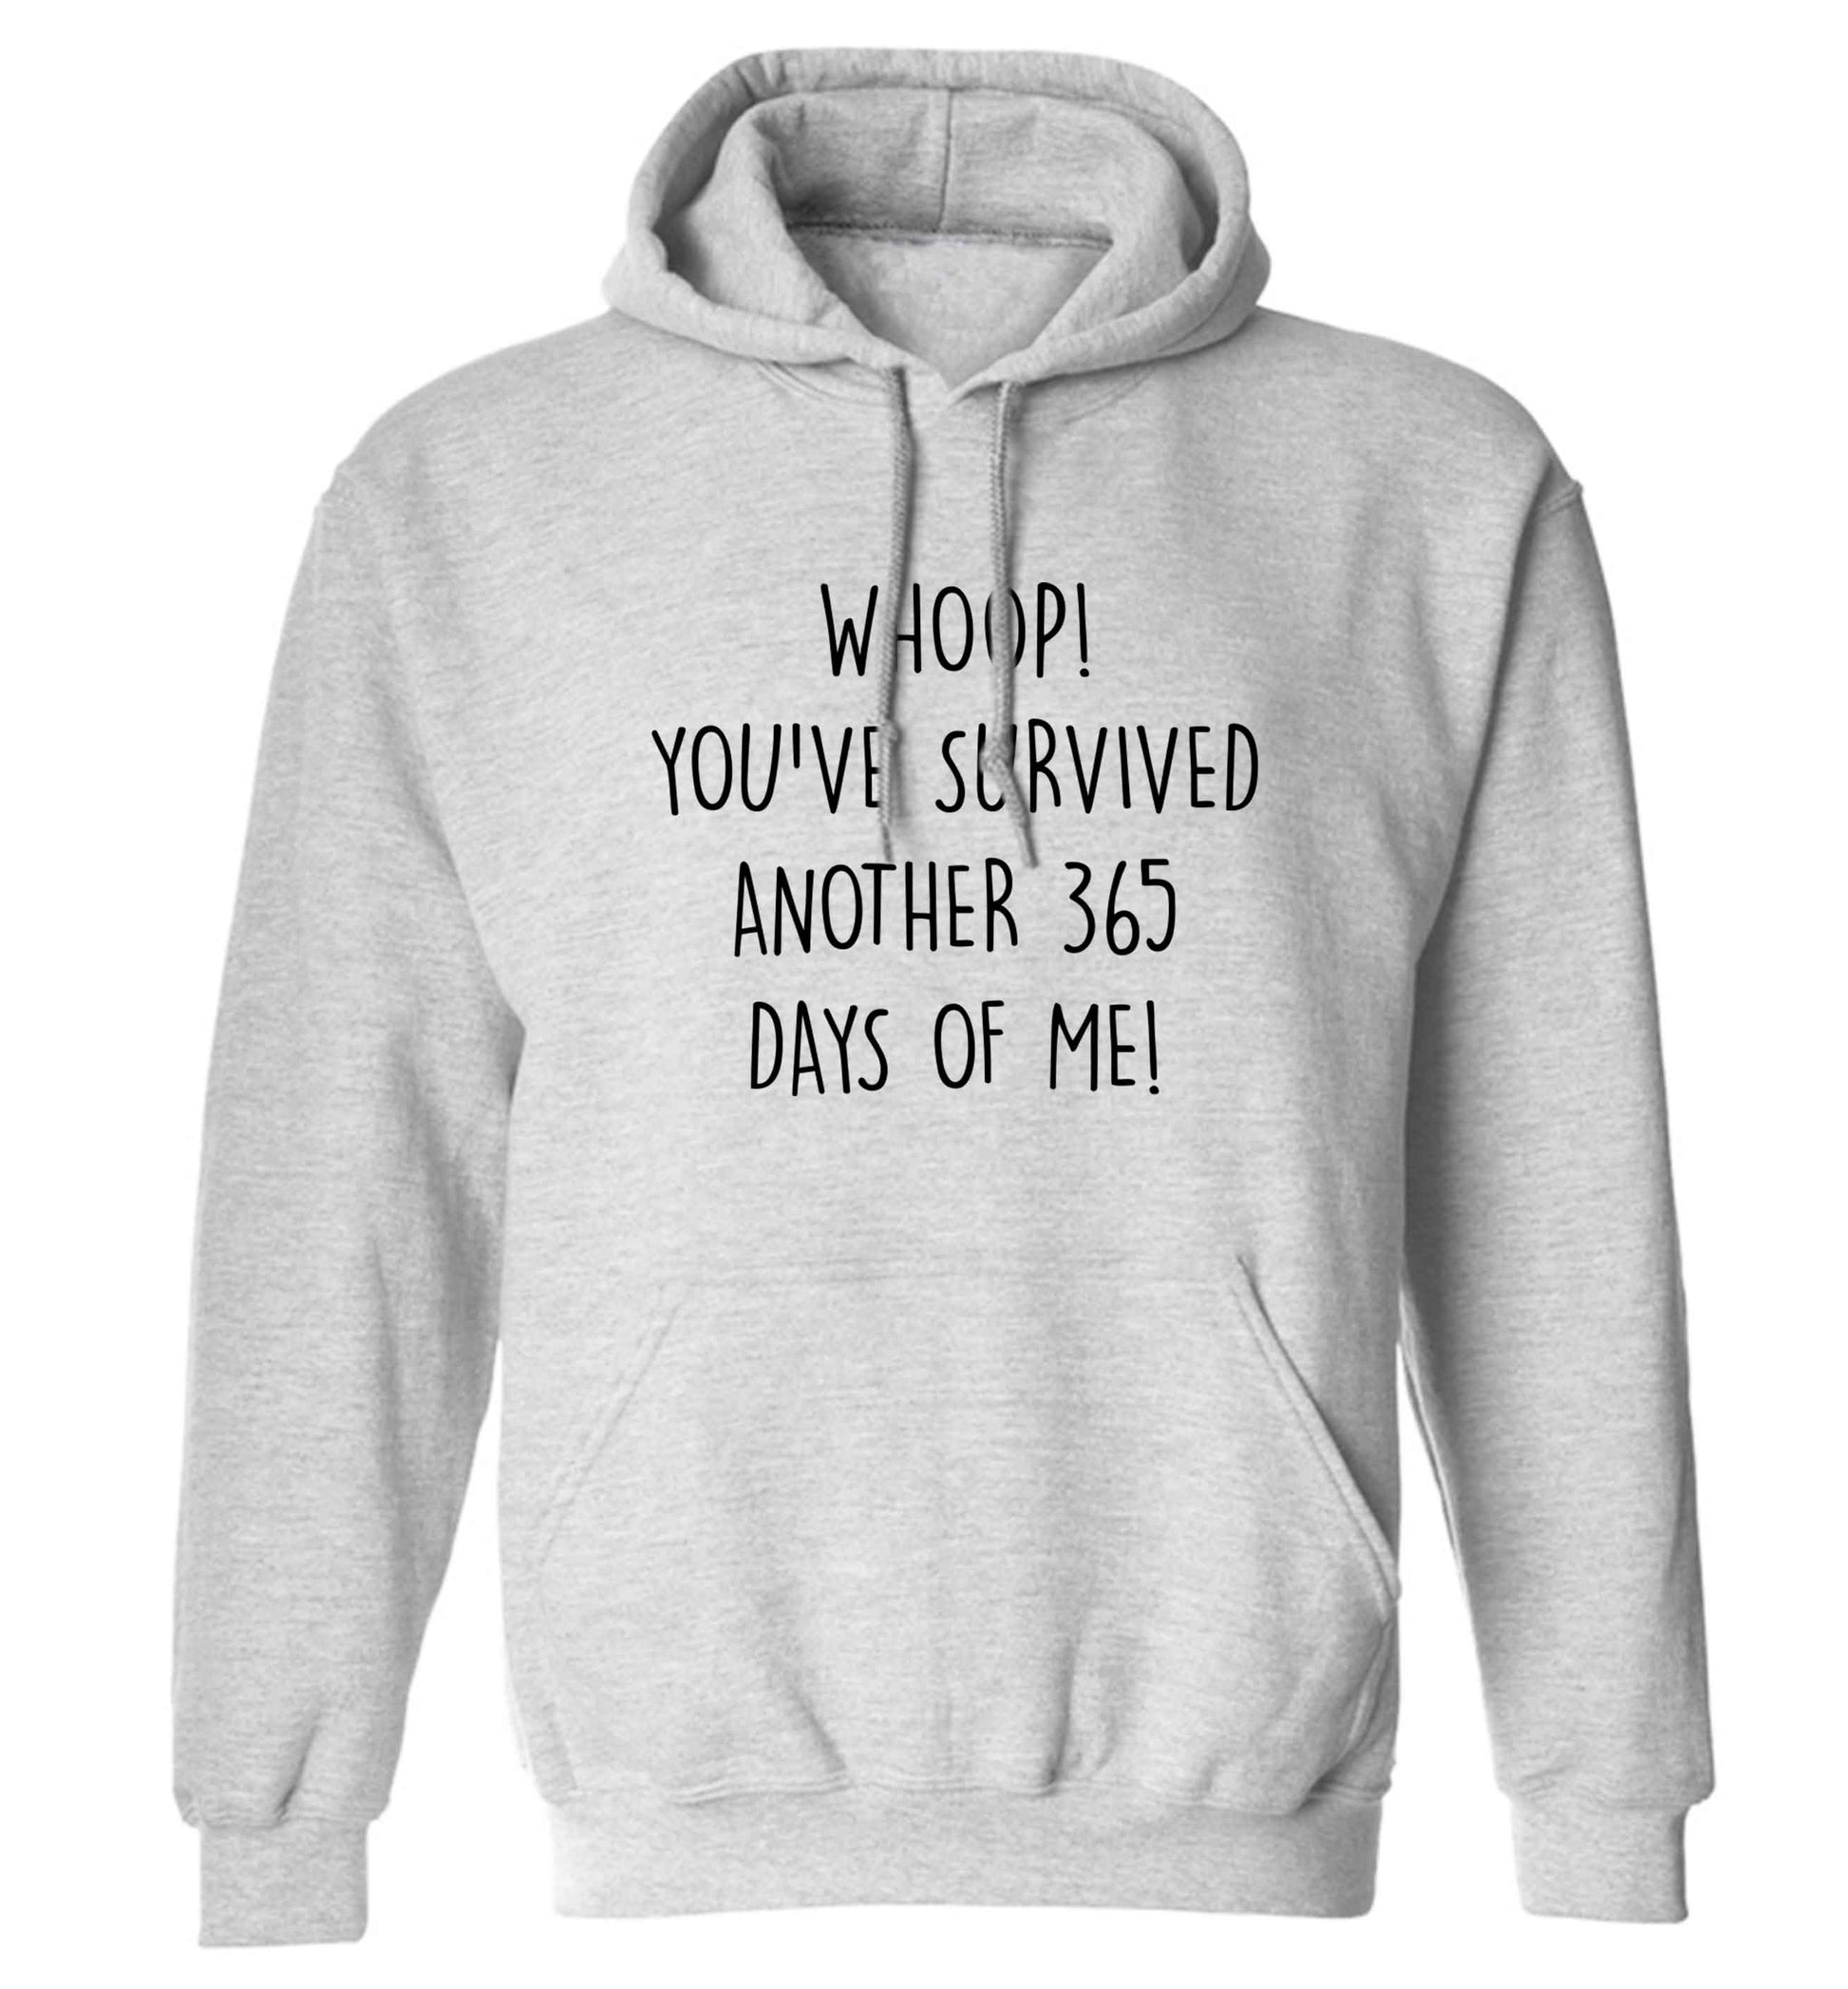 Whoop! You've survived another 365 days with me! adults unisex grey hoodie 2XL